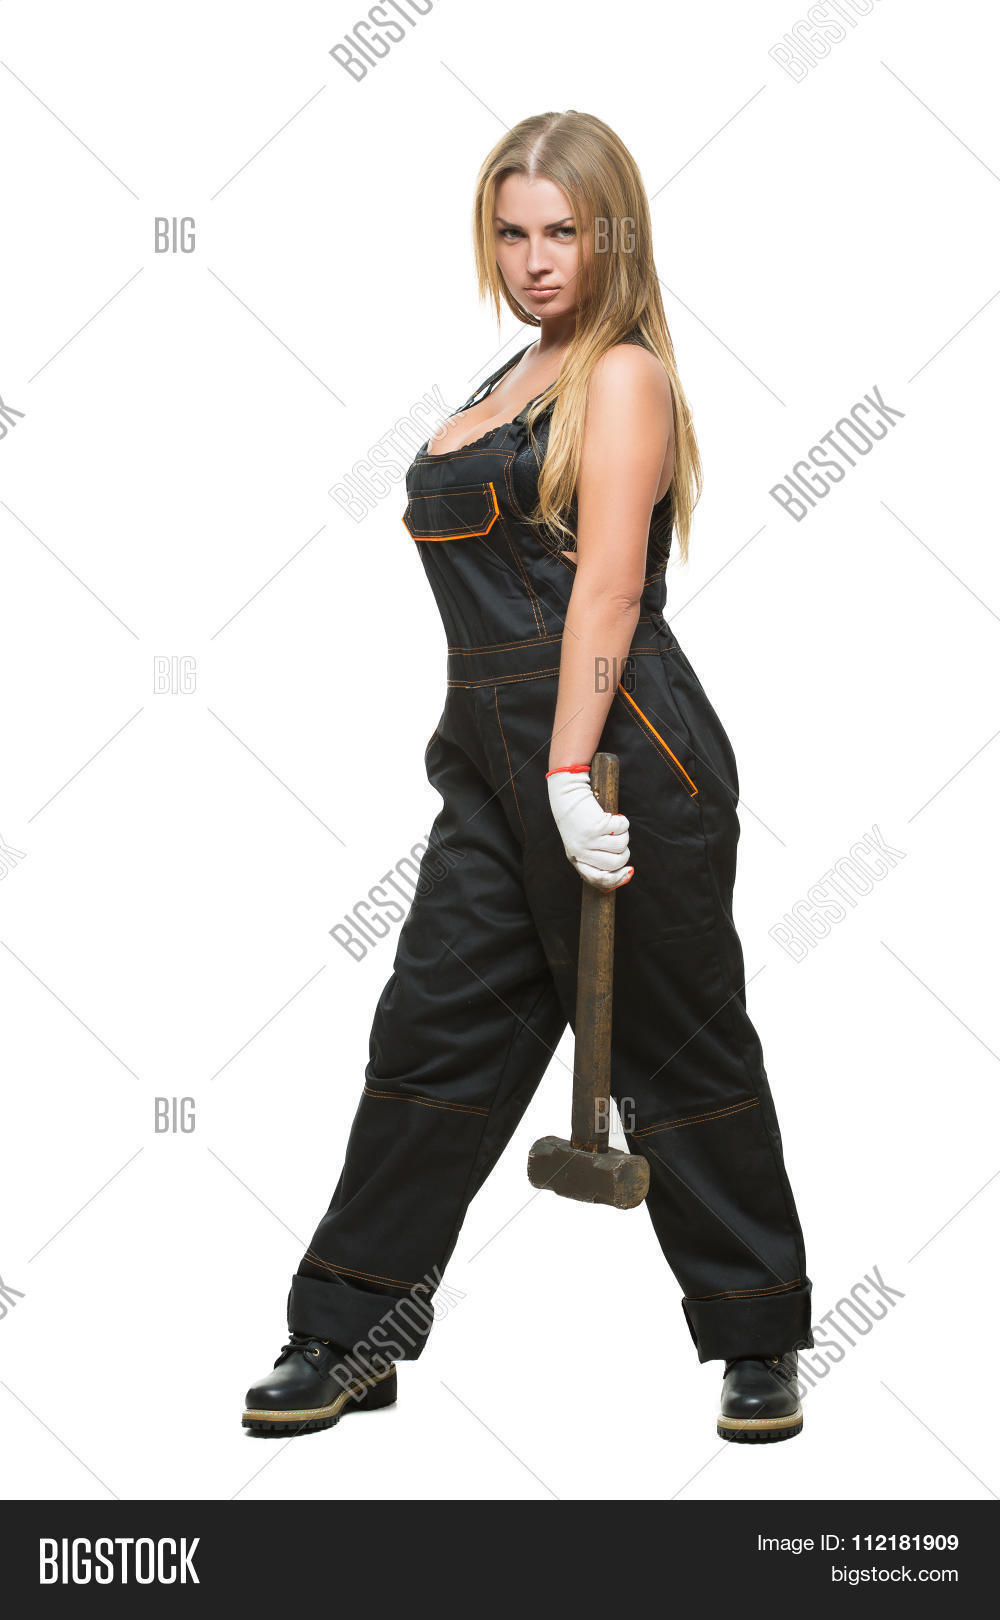 Best of Hot chick in overalls